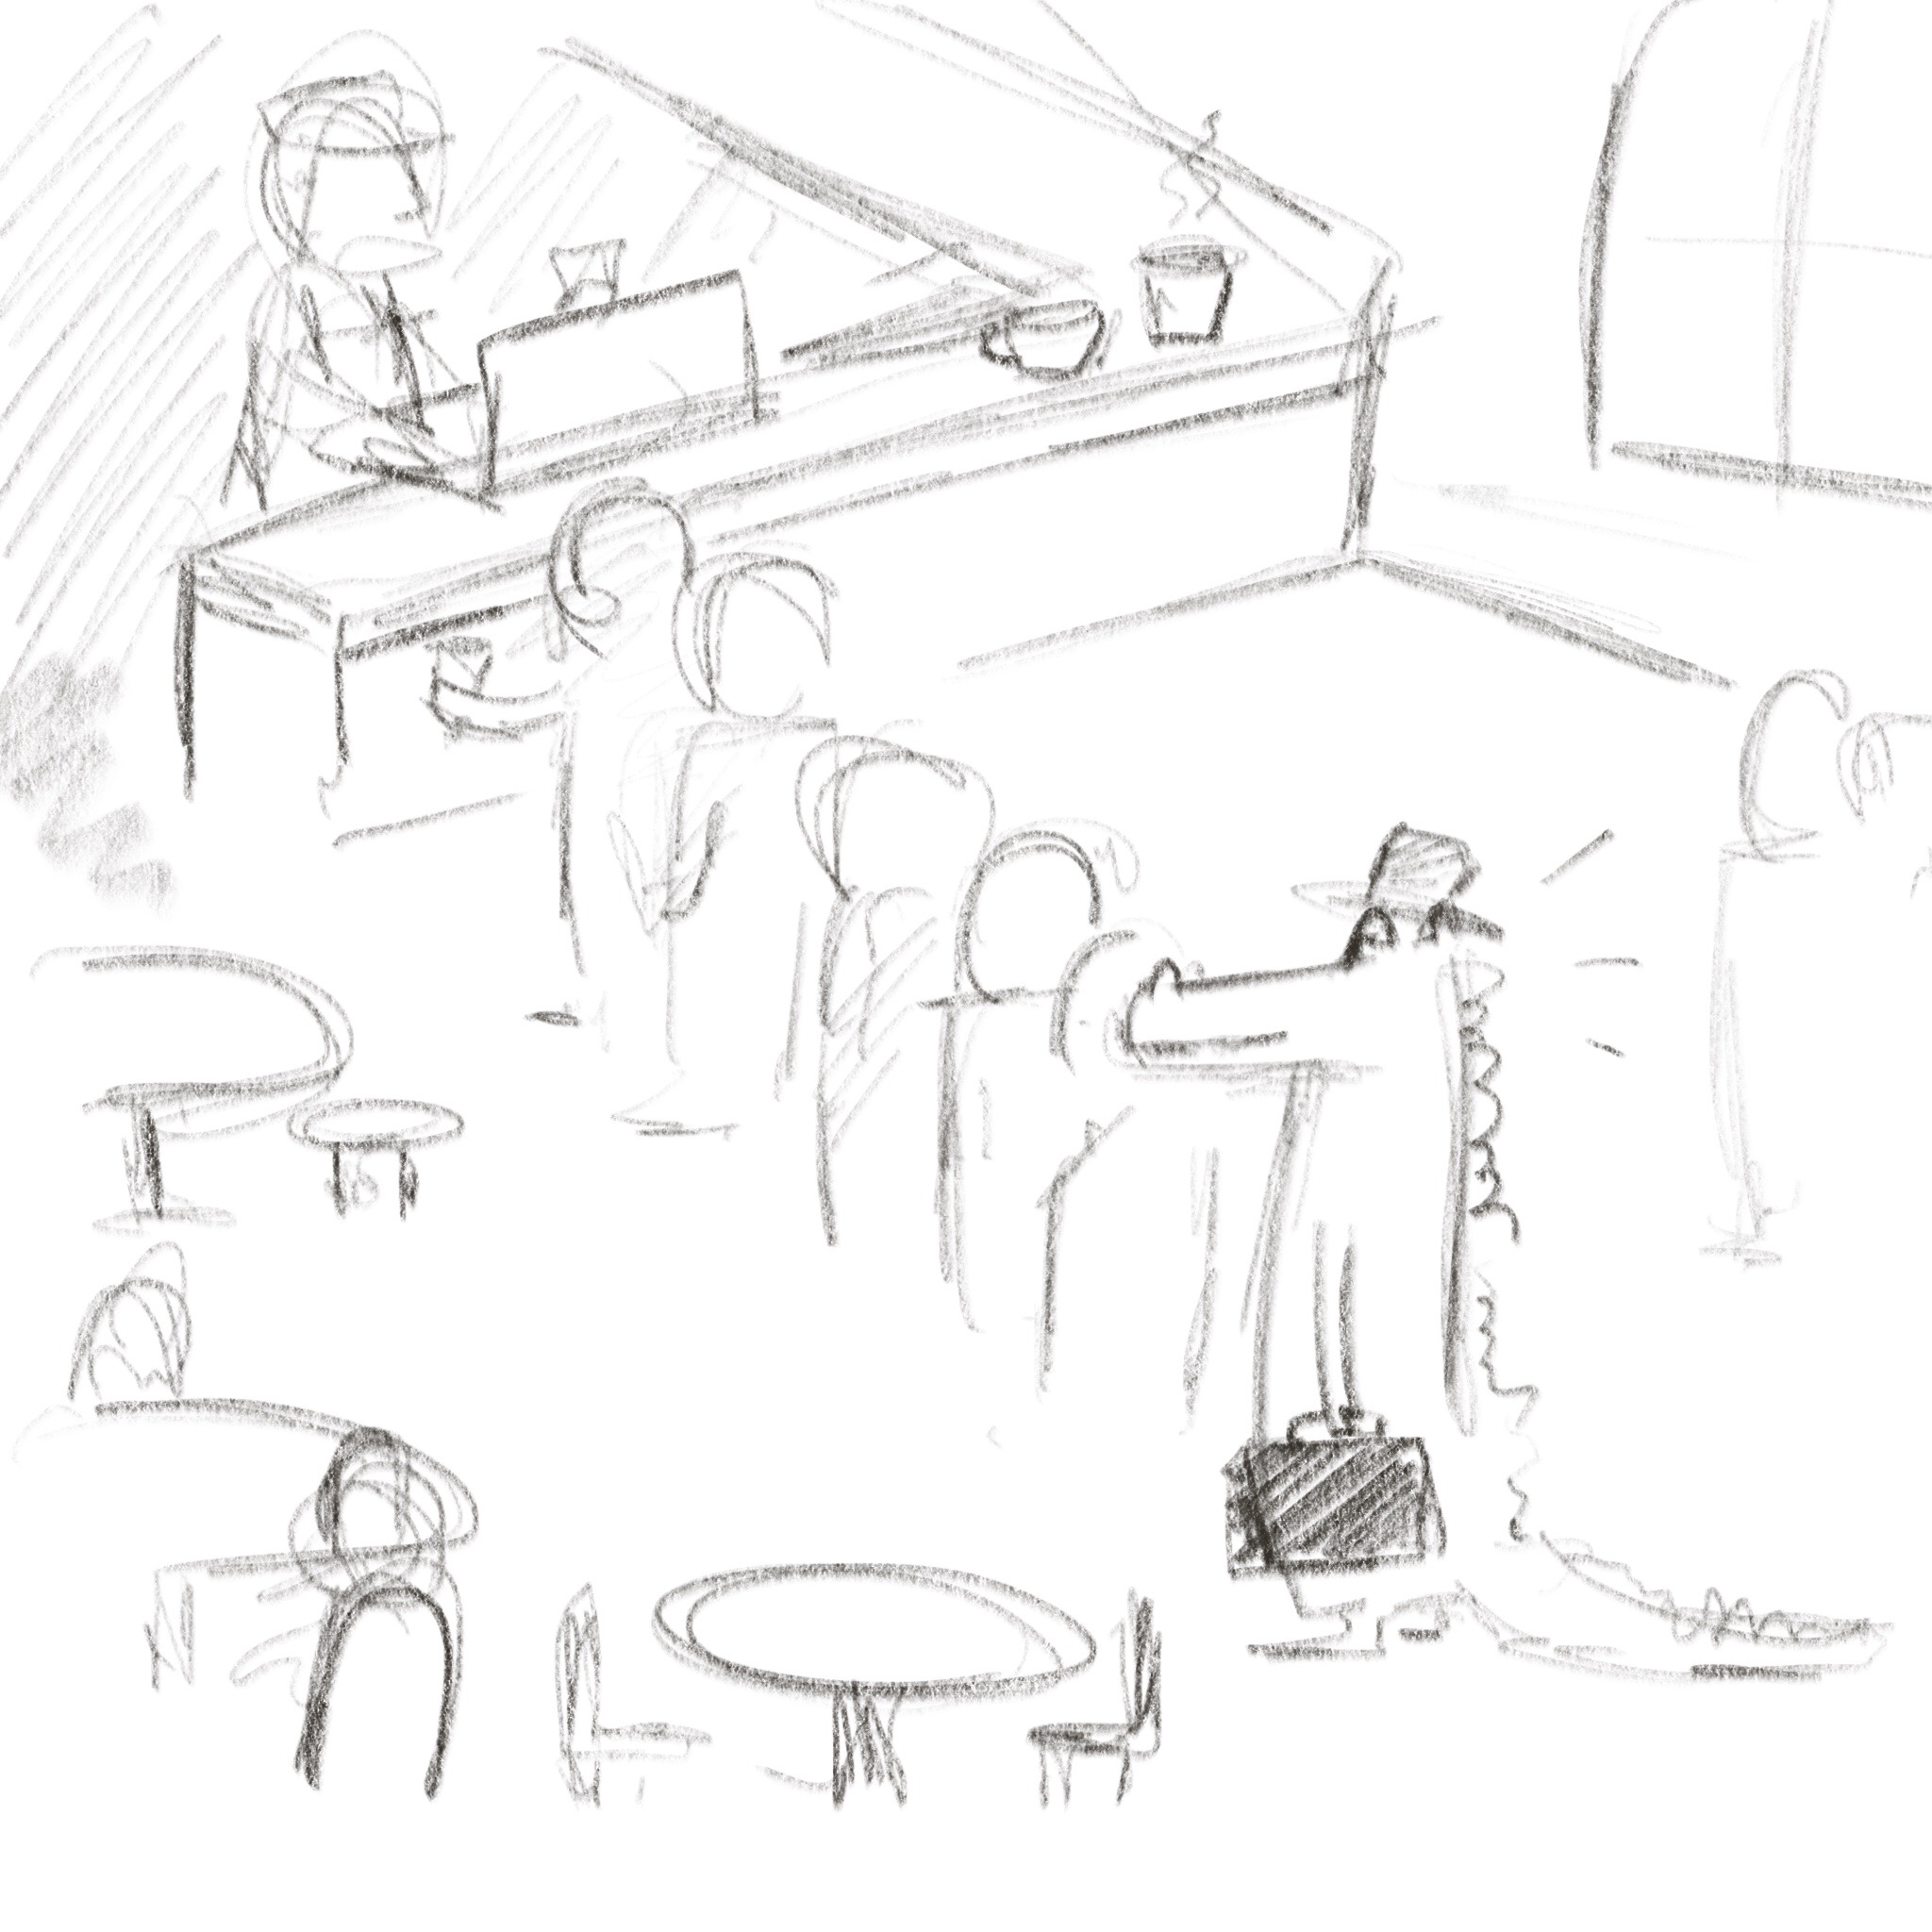 Frame two drawing of alligator holding a briefcase standing in line in a coffee shop